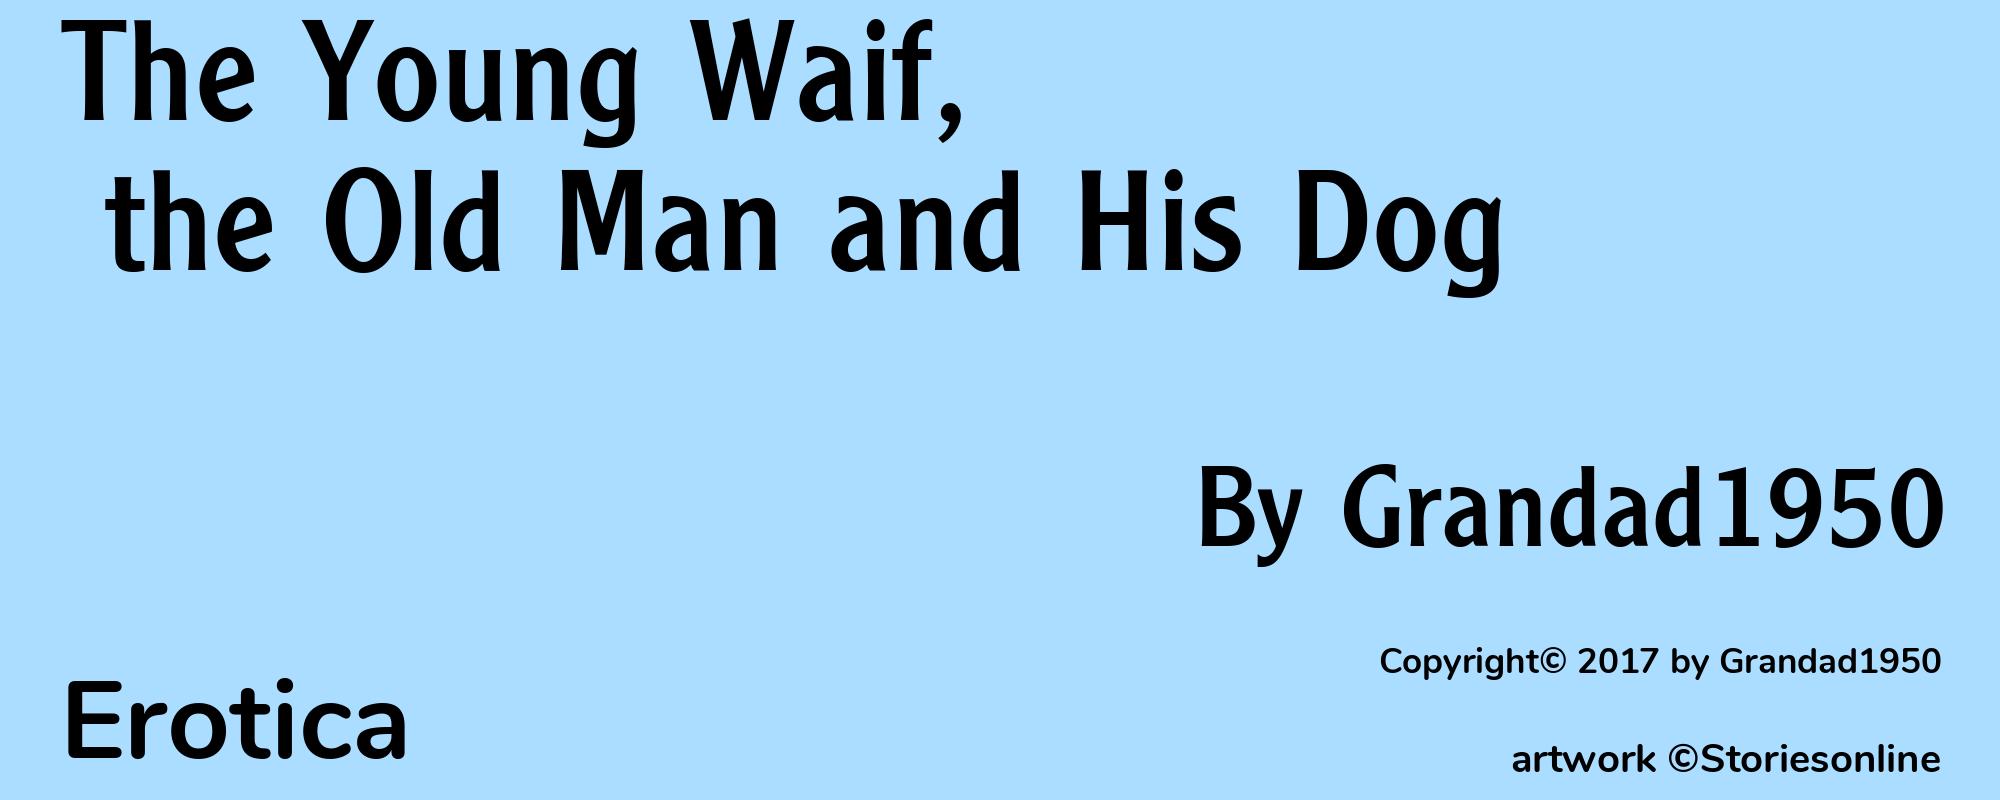 The Young Waif, the Old Man and His Dog - Cover